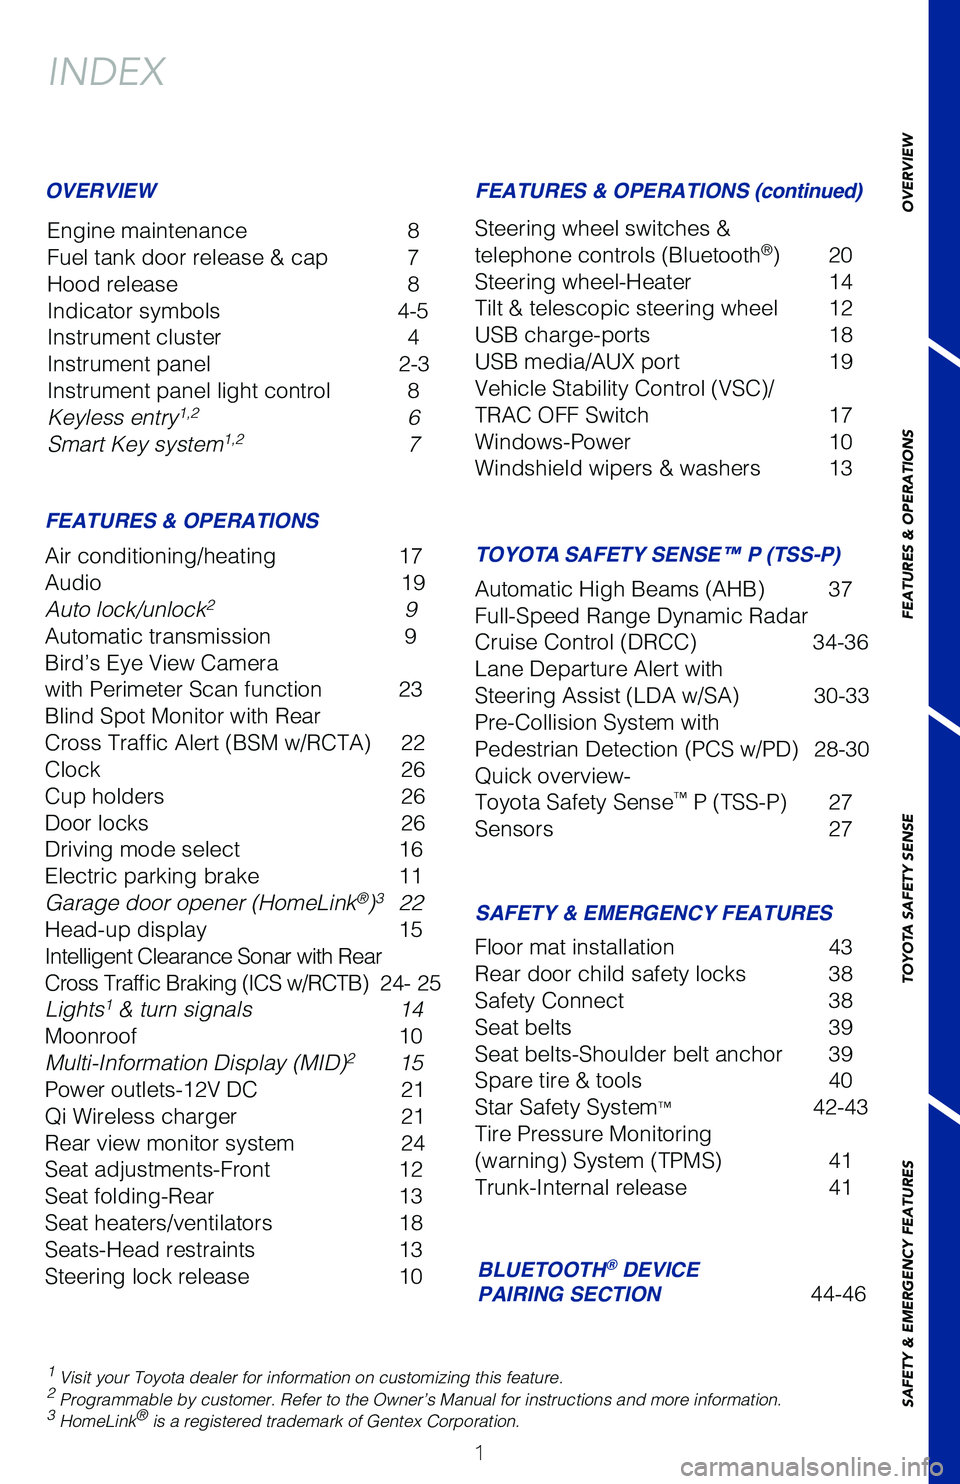 TOYOTA AVALON 2020  Owners Manual (in English) 1
OVERVIEW
FEATURES & OPERATIONS
TOYOTA SAFETY SENSE
SAFETY & EMERGENCY FEATURES
INDEX
Engine maintenance  8
Fuel tank door release & cap  7
Hood release   8
Indicator symbols  4-5
Instrument cluster 